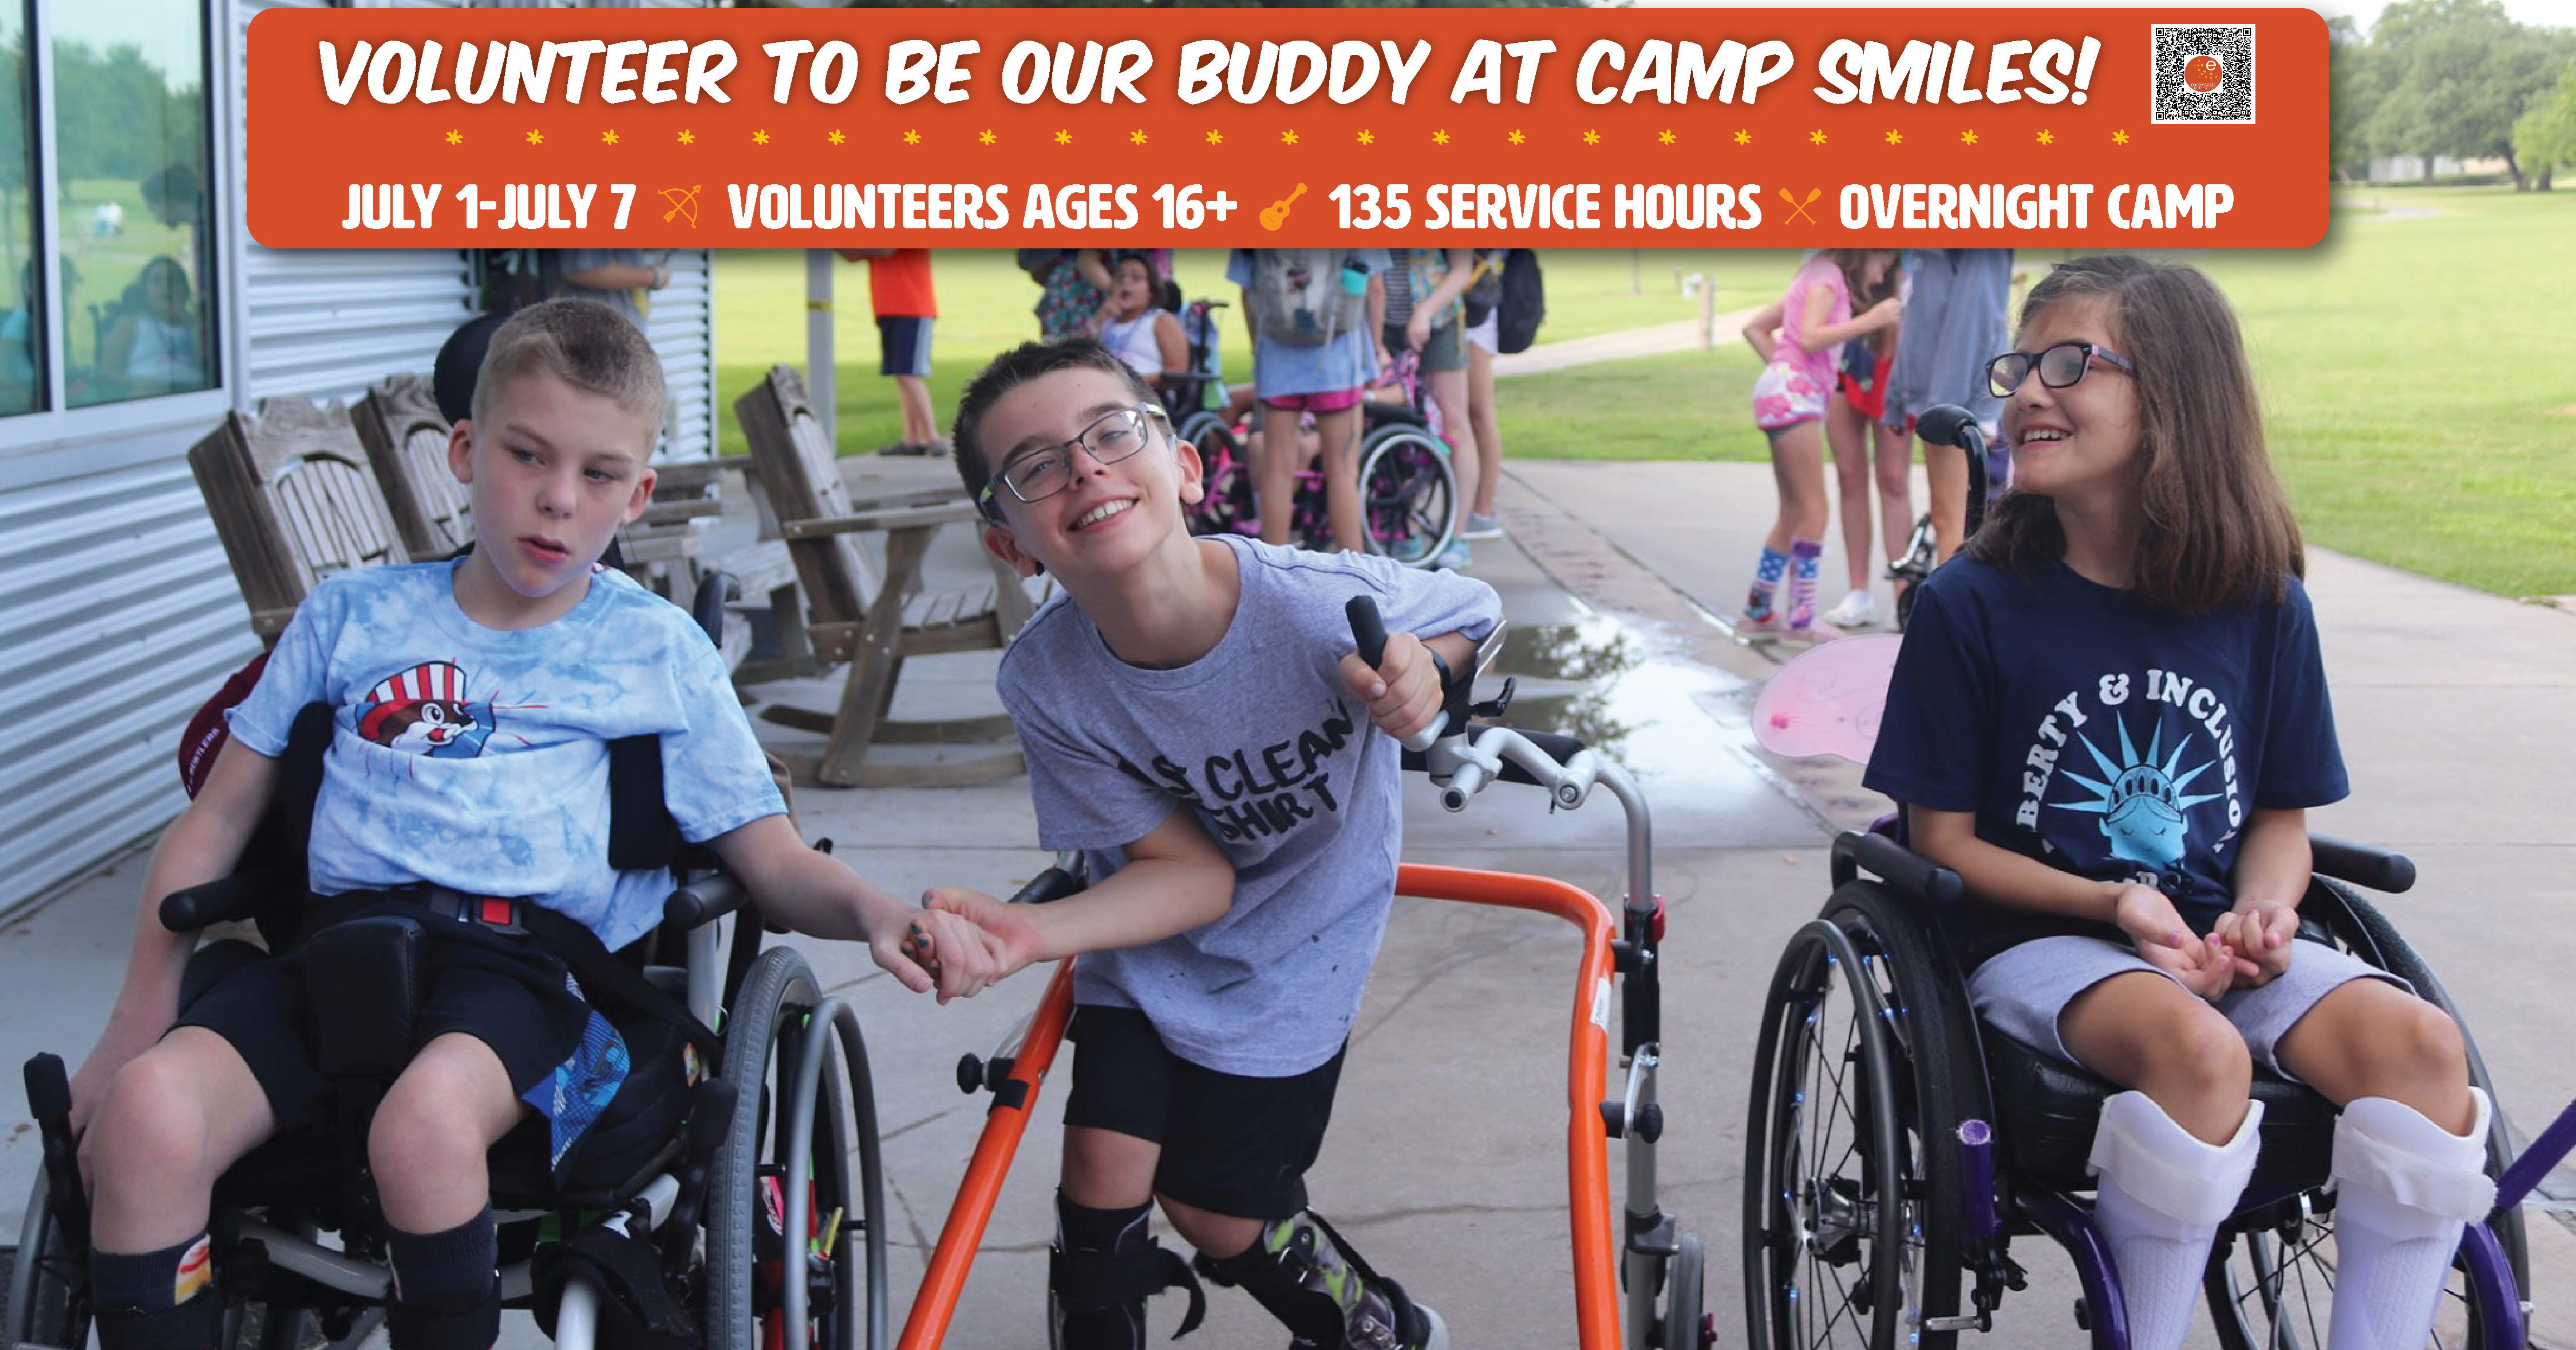 Volunteer to be our Buddy at Camp Smiles